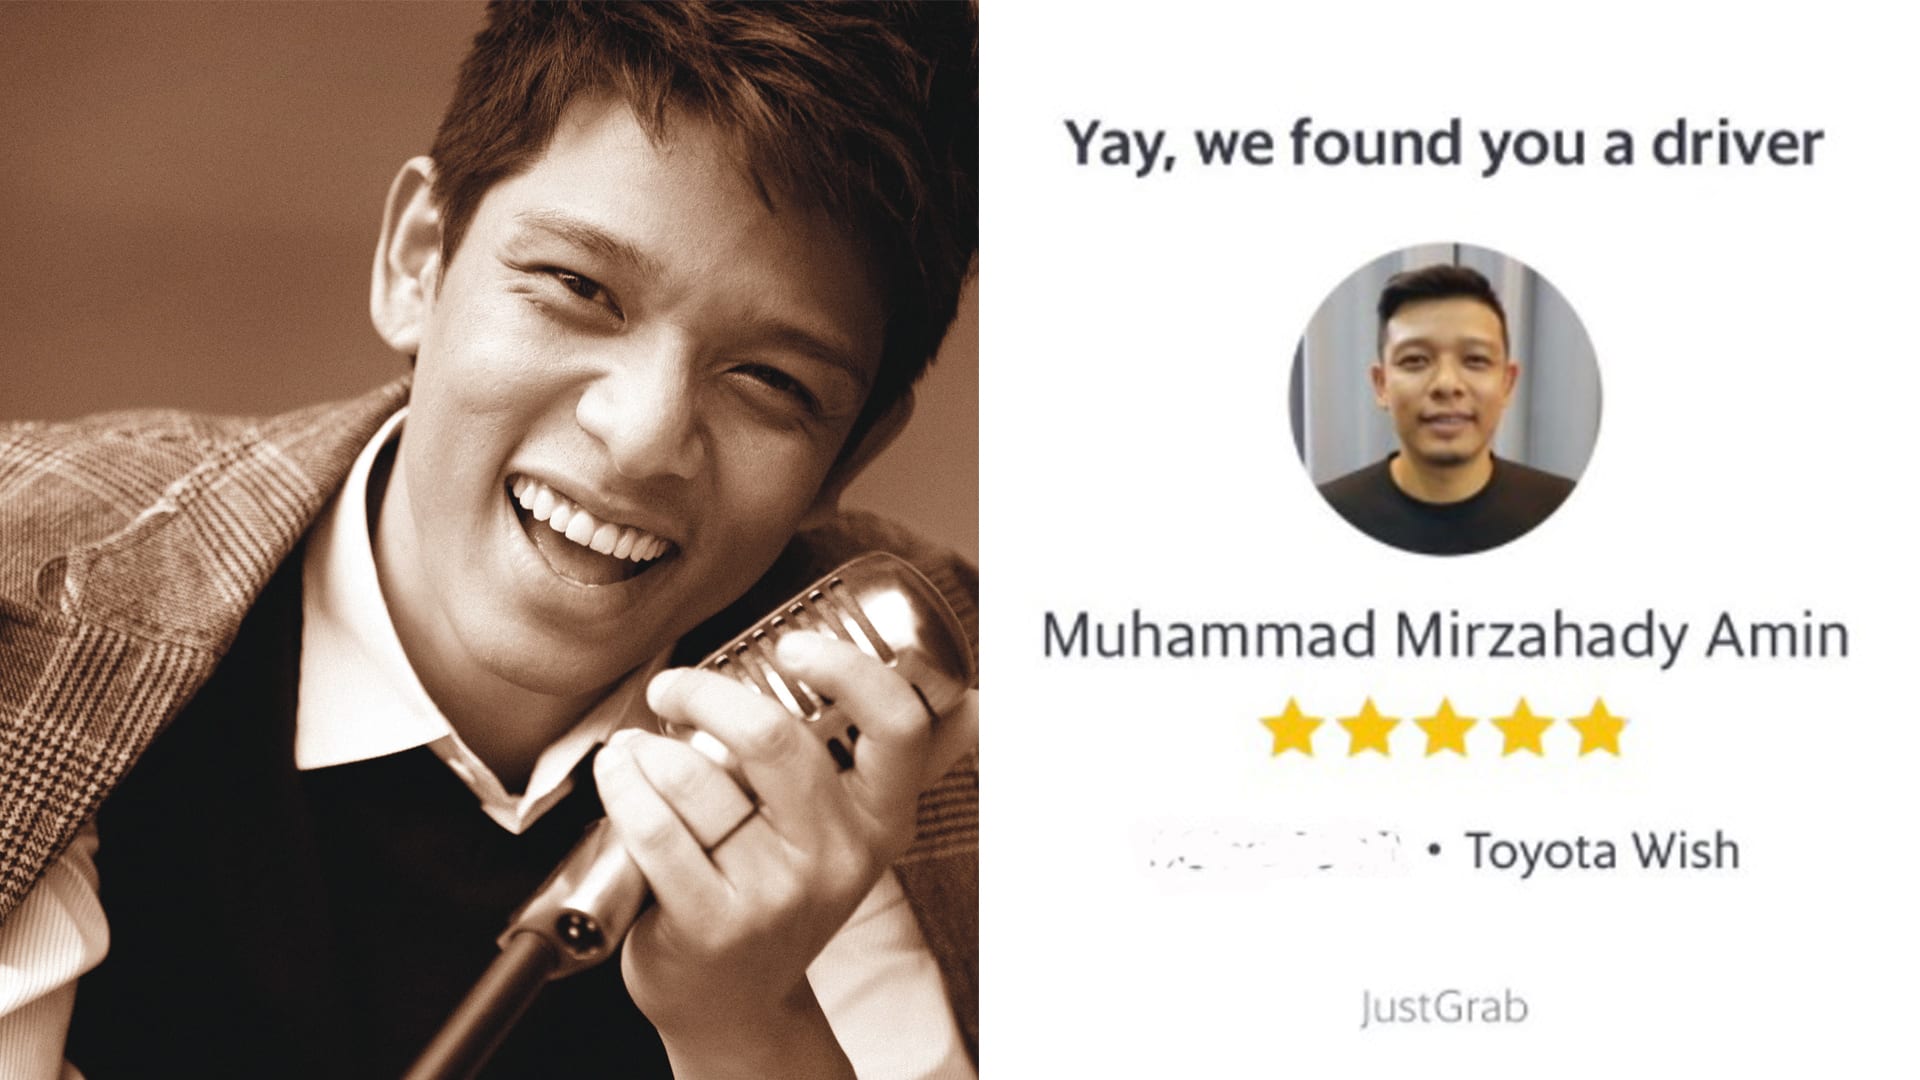 Singapore Idol-Turned-Grab Driver Hady Mirza's Past 8 DAYS Interviews Show His Desire For A Simple Life